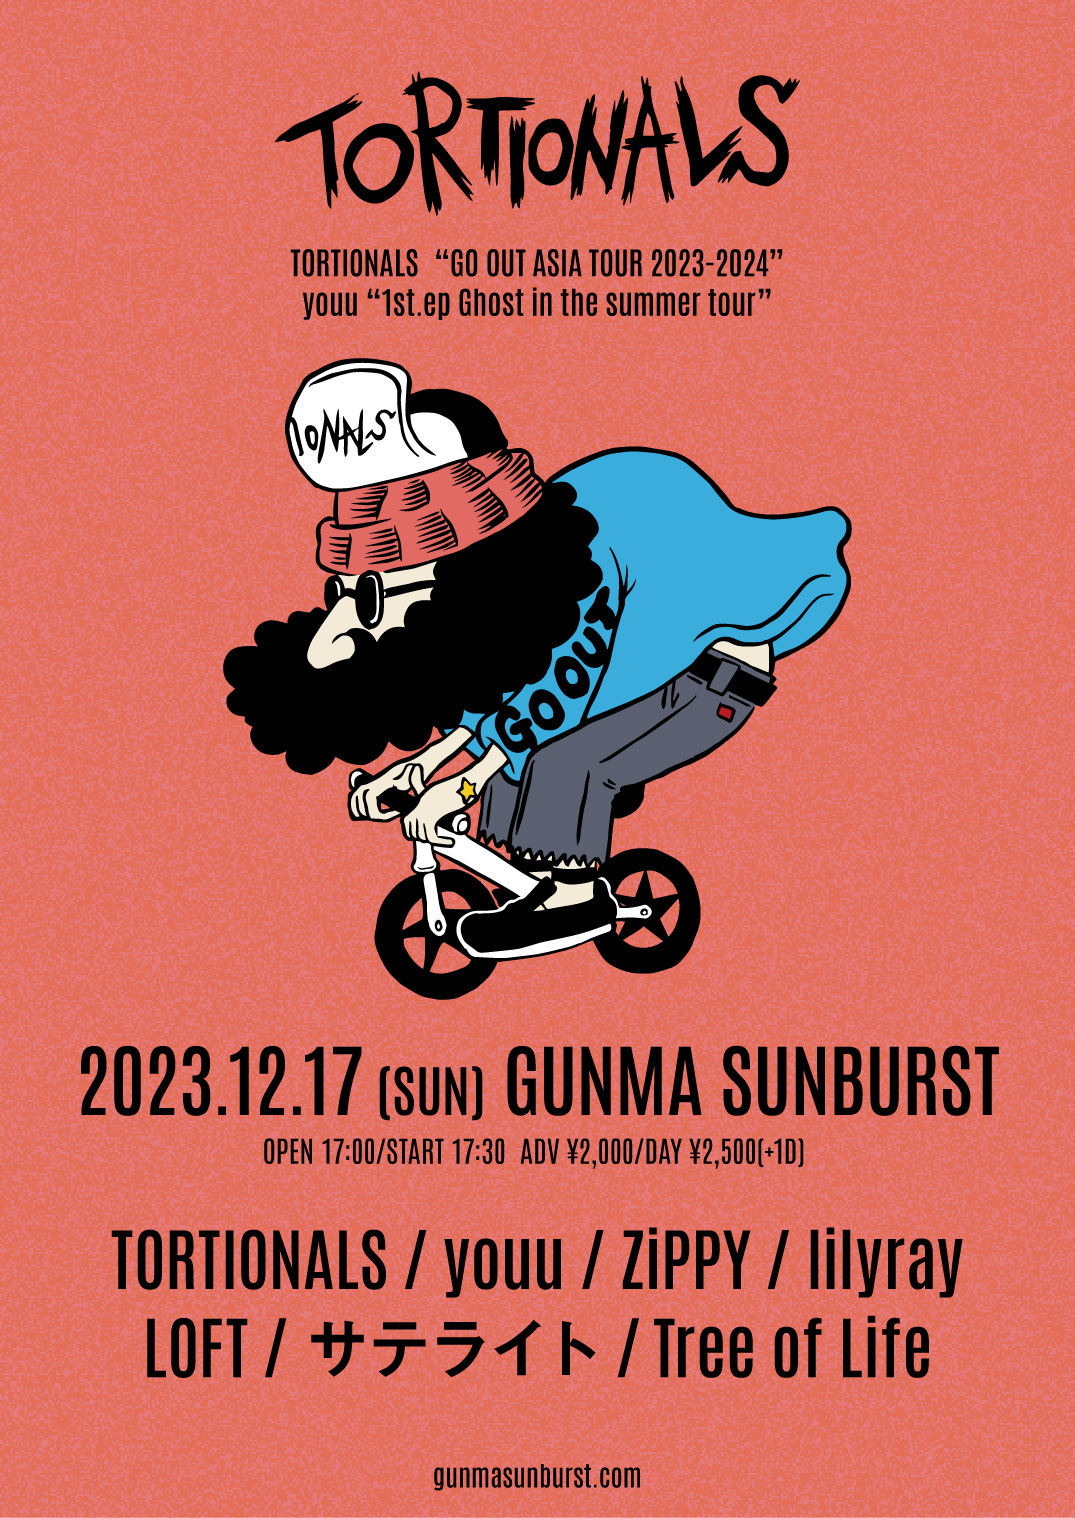 ubu pre. <br>TORTIONALS “GO OUT ASIA TOUR 2023-2024”<br>youu “1st.ep Ghost in the summer tour”